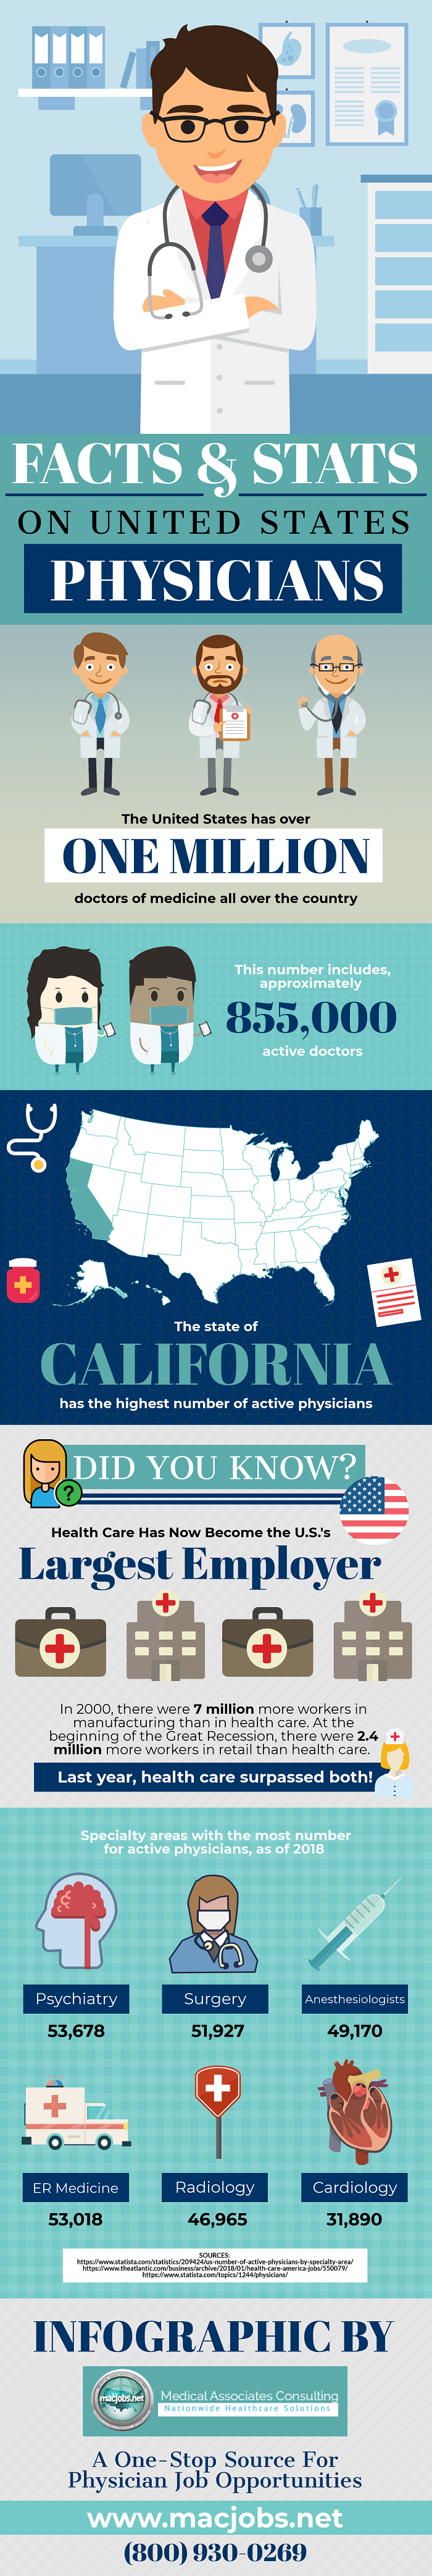 Facts & Stats on United States Physicians